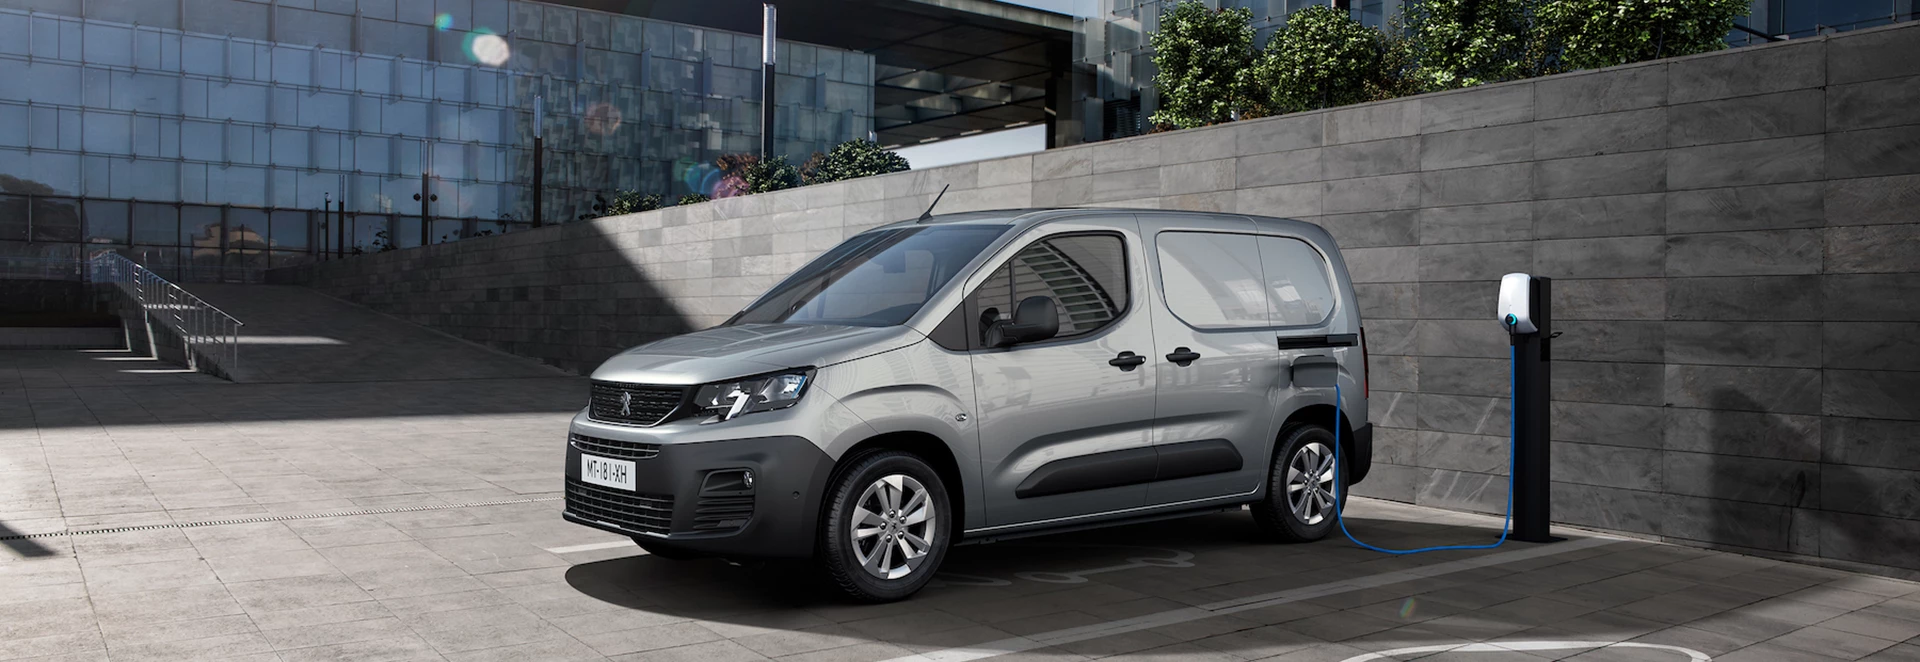 Peugeot expands electric van line-up with new e-Partner 